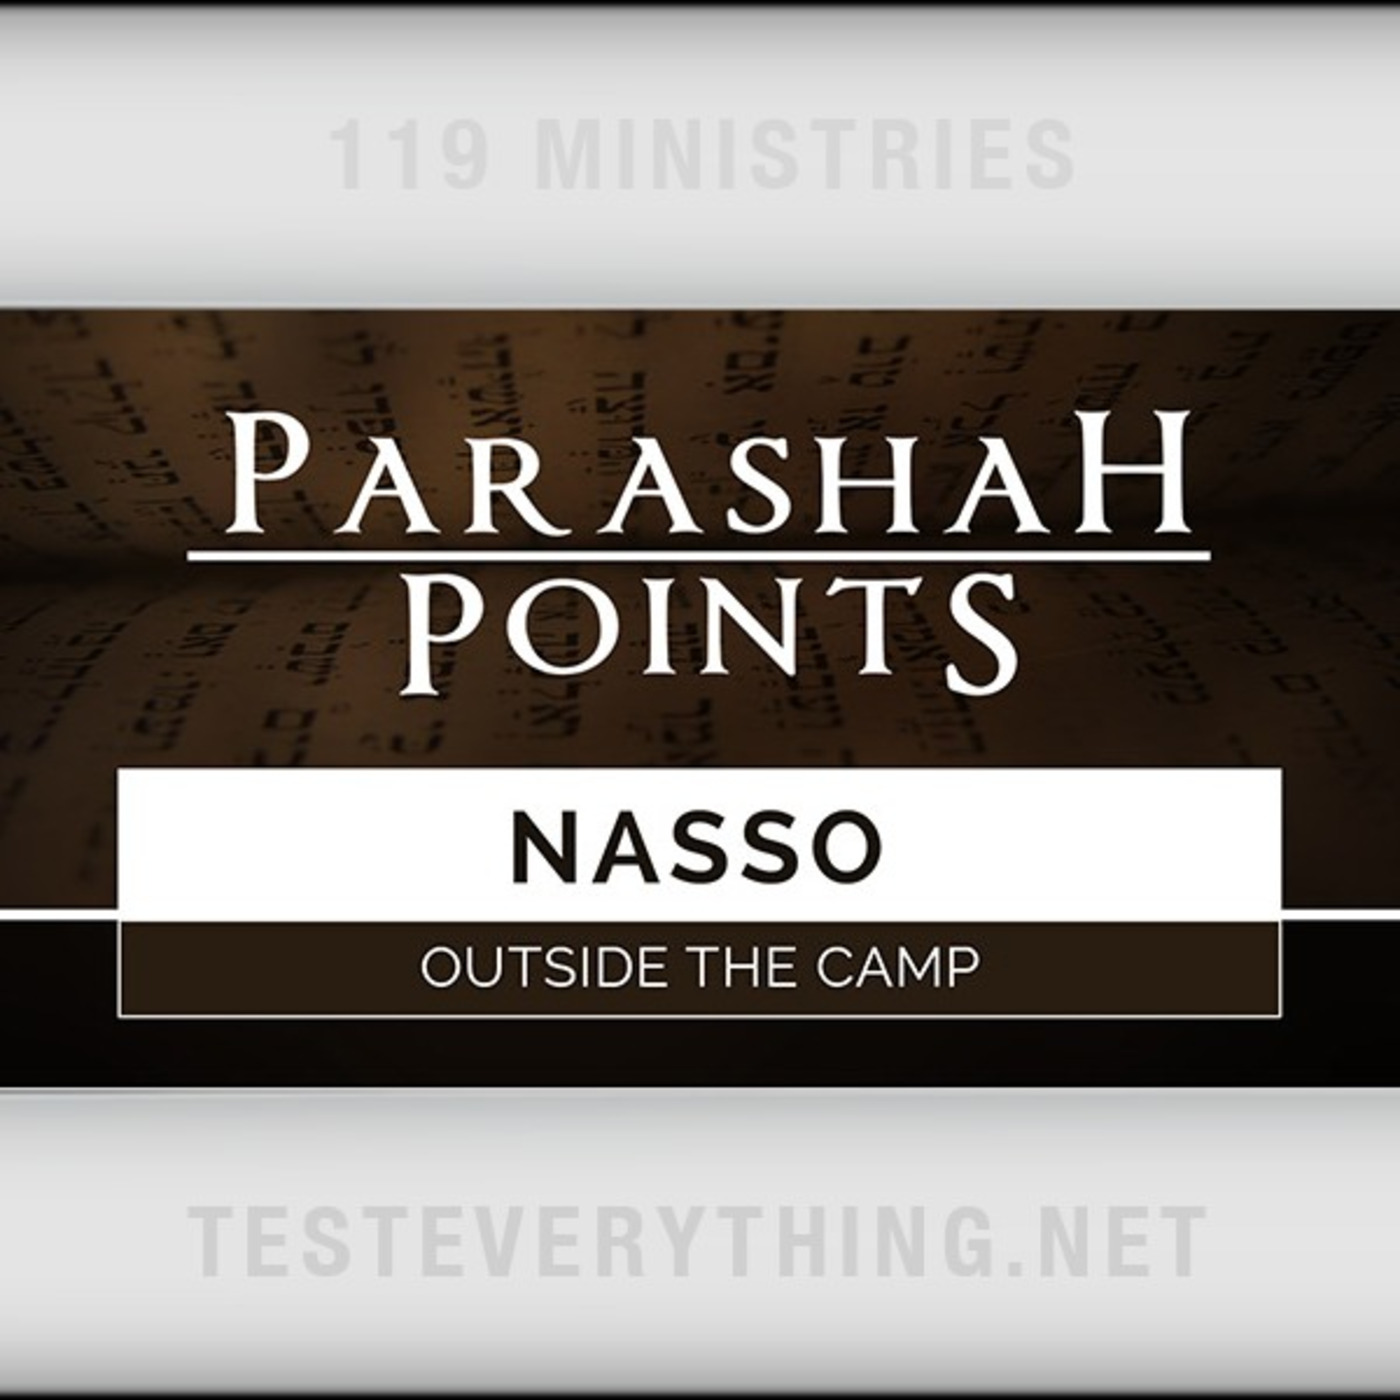 Parashah Points: Nasso - Outside the Camp